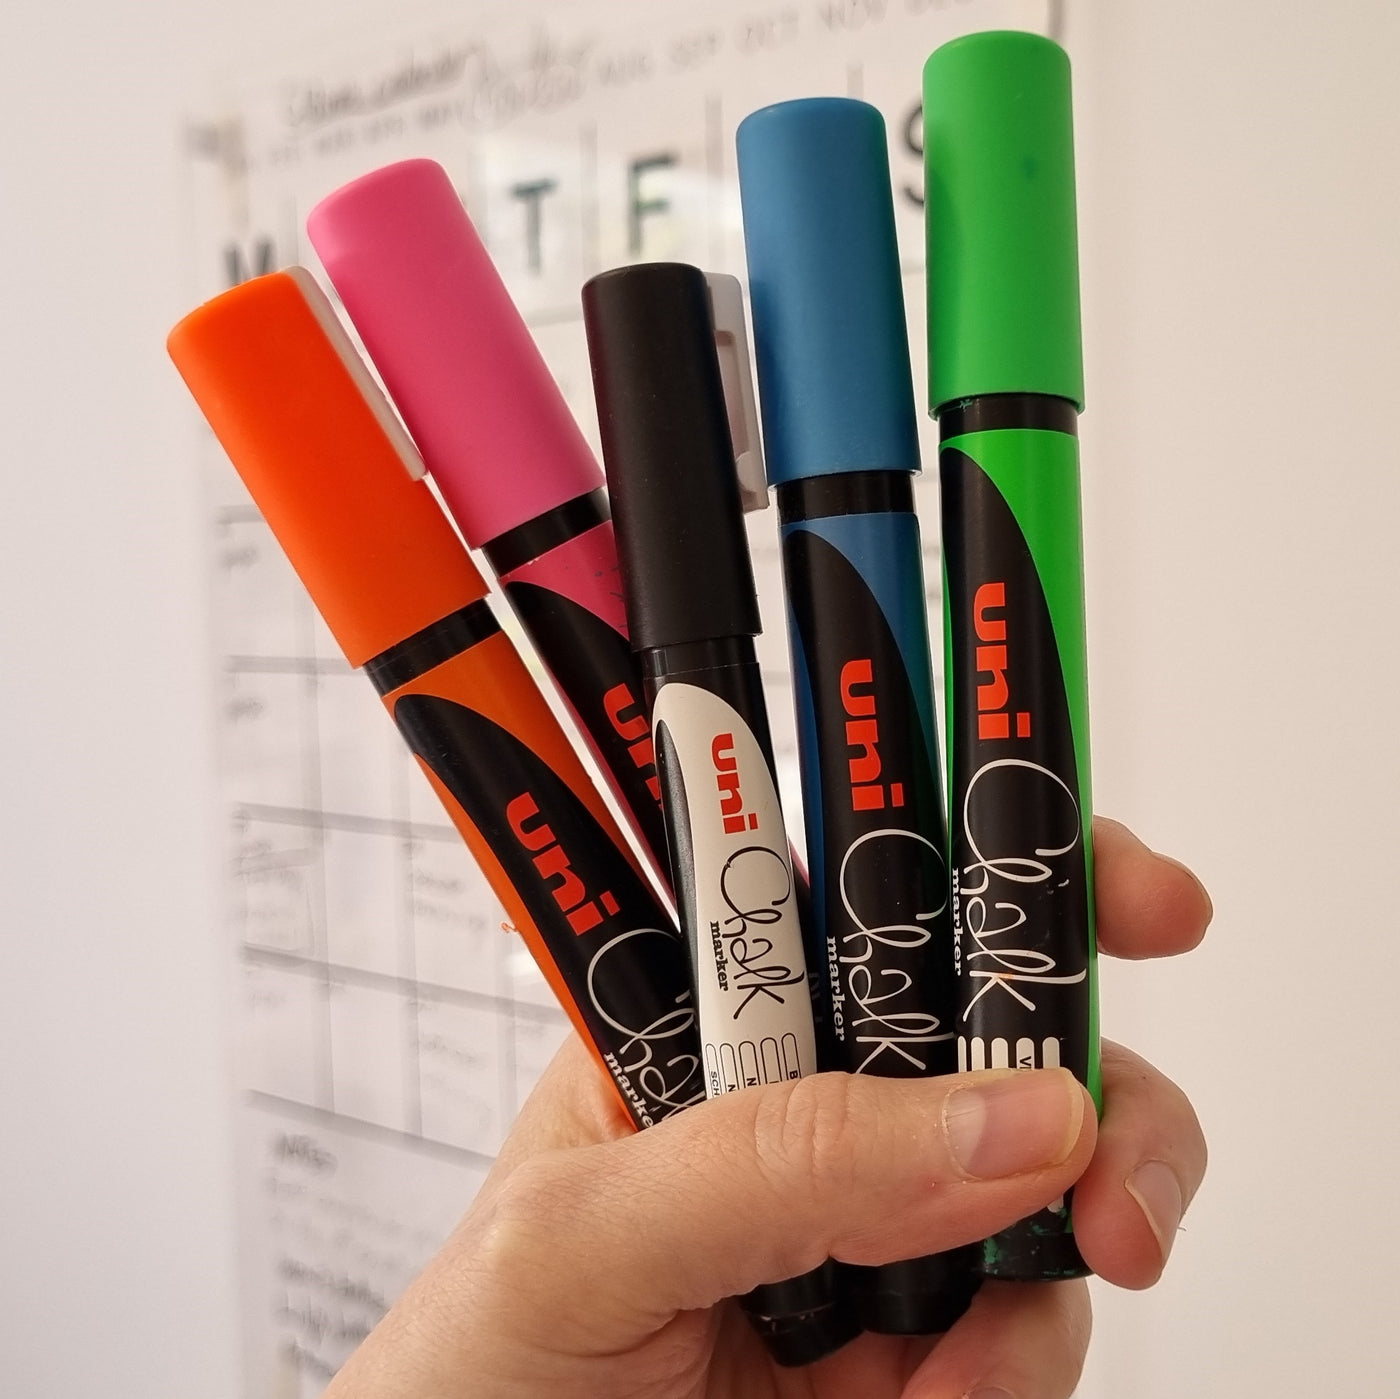 Shop Chalk Markers and Accessories at Siisti